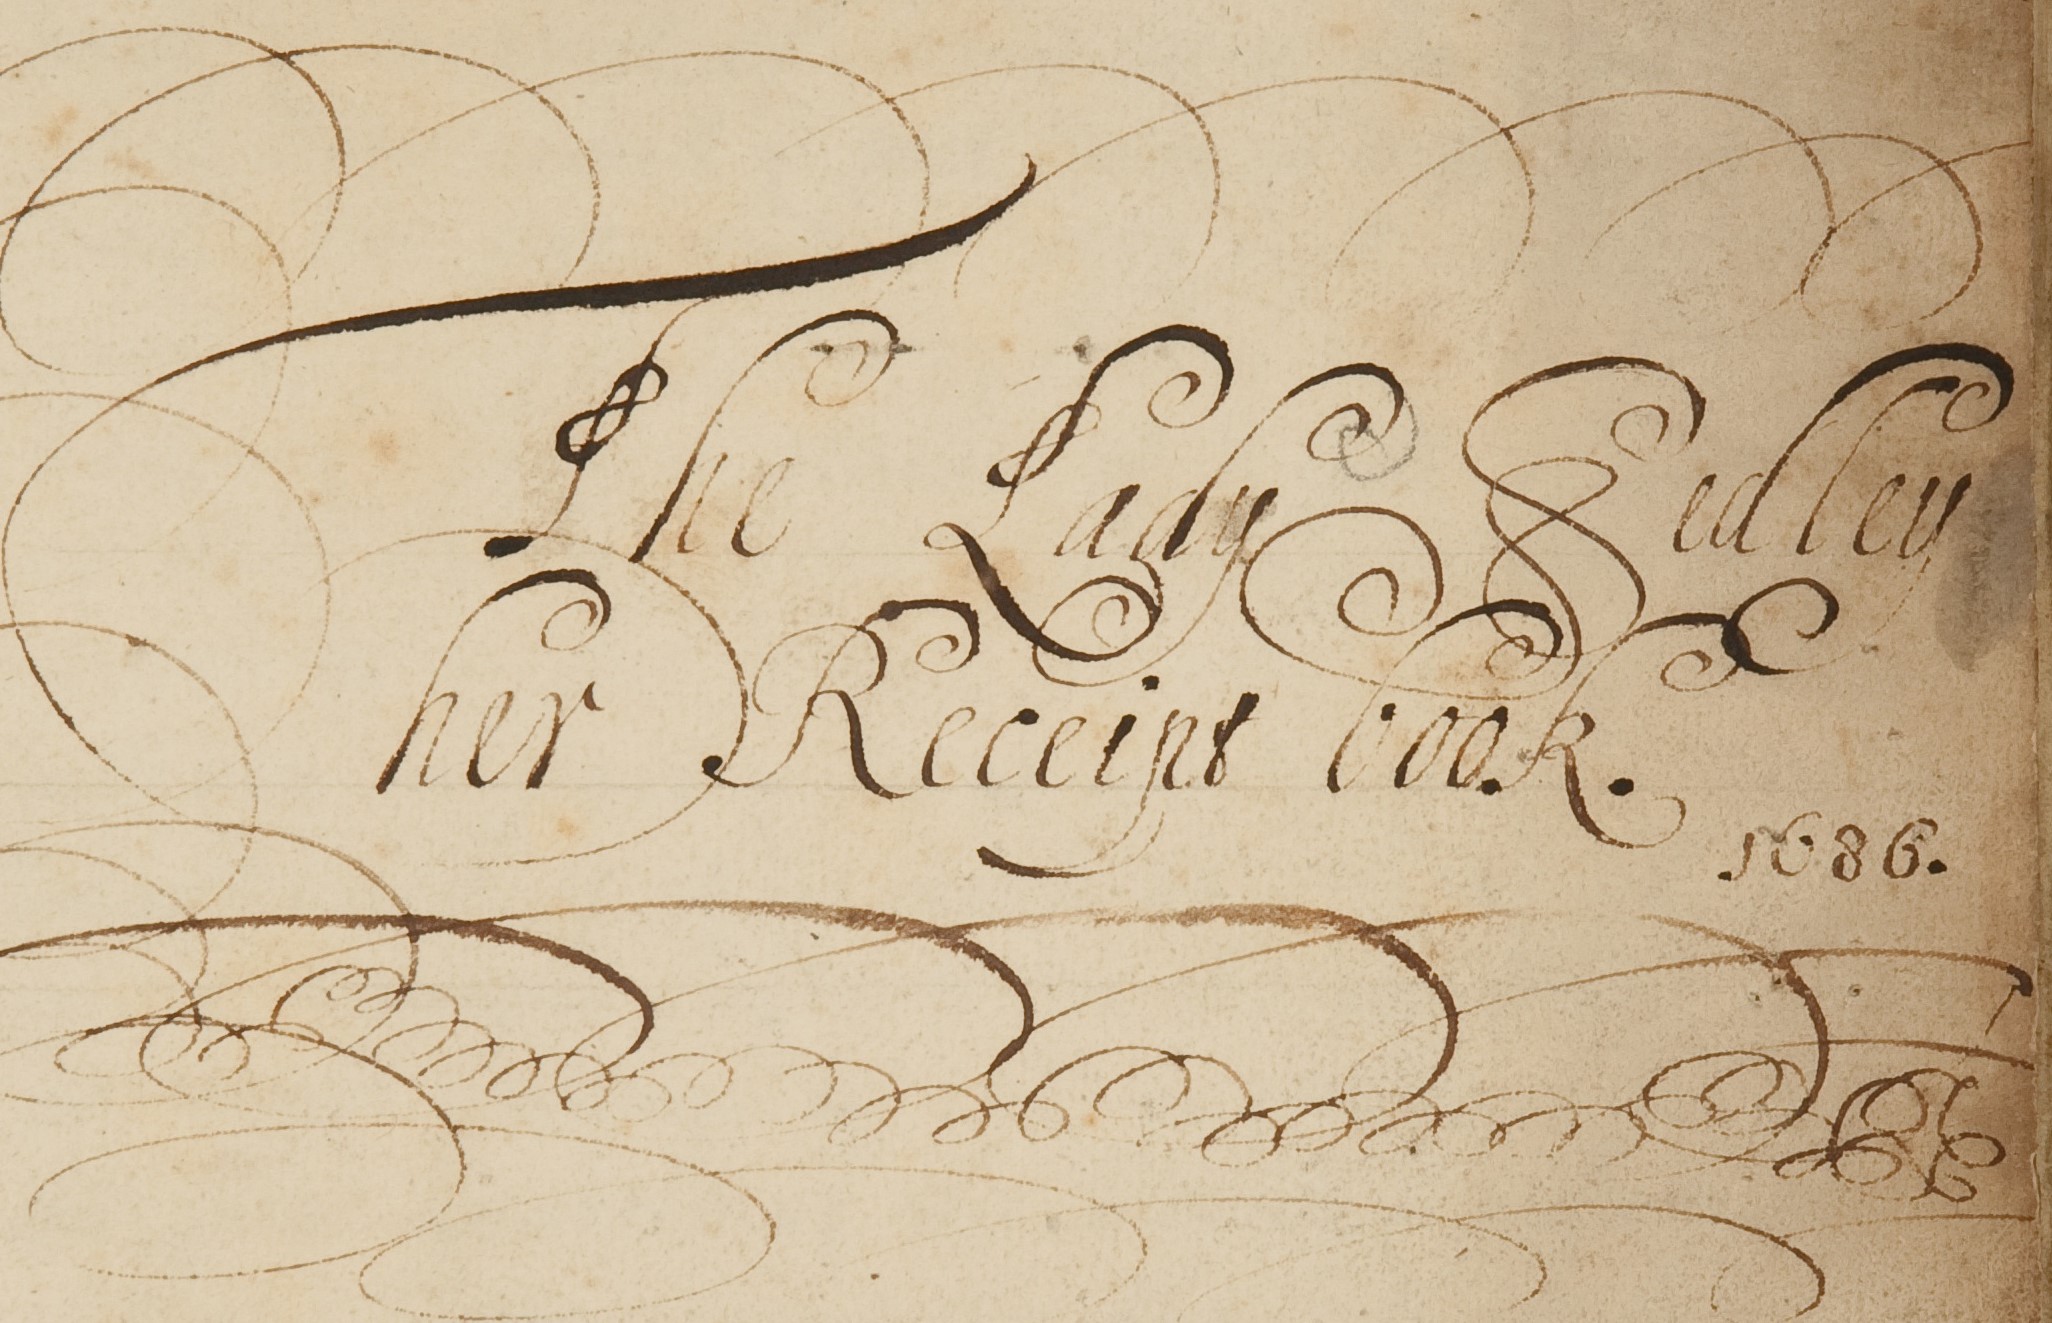 Frontispiece with handwritten inscription for receipt book Catherine Sedley. 